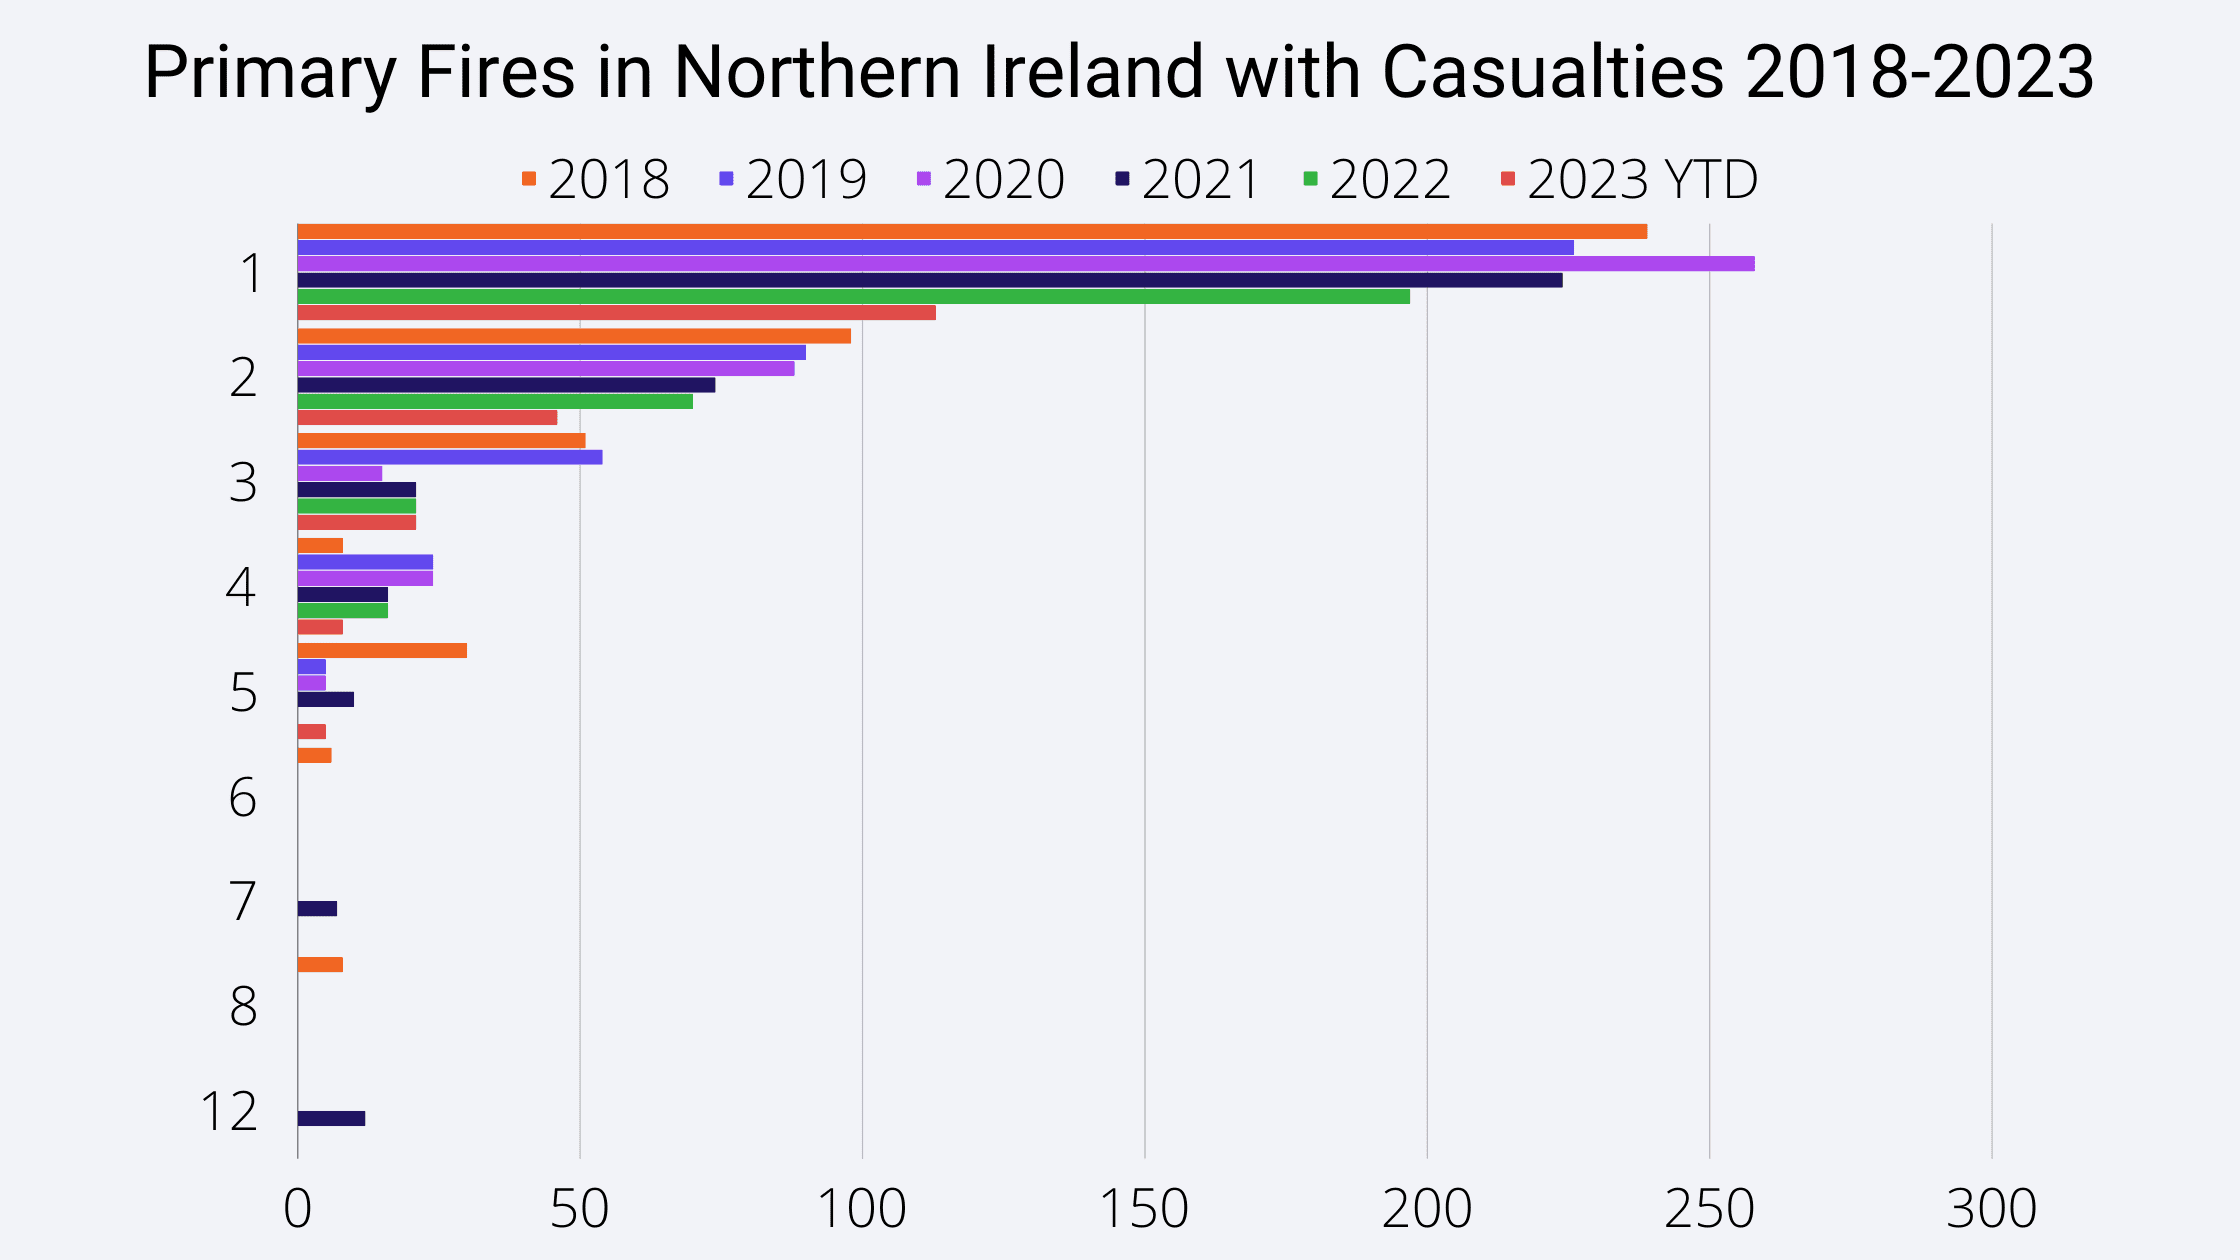 Primary Fires in Northern Ireland with Casualties 2018-2023 chart